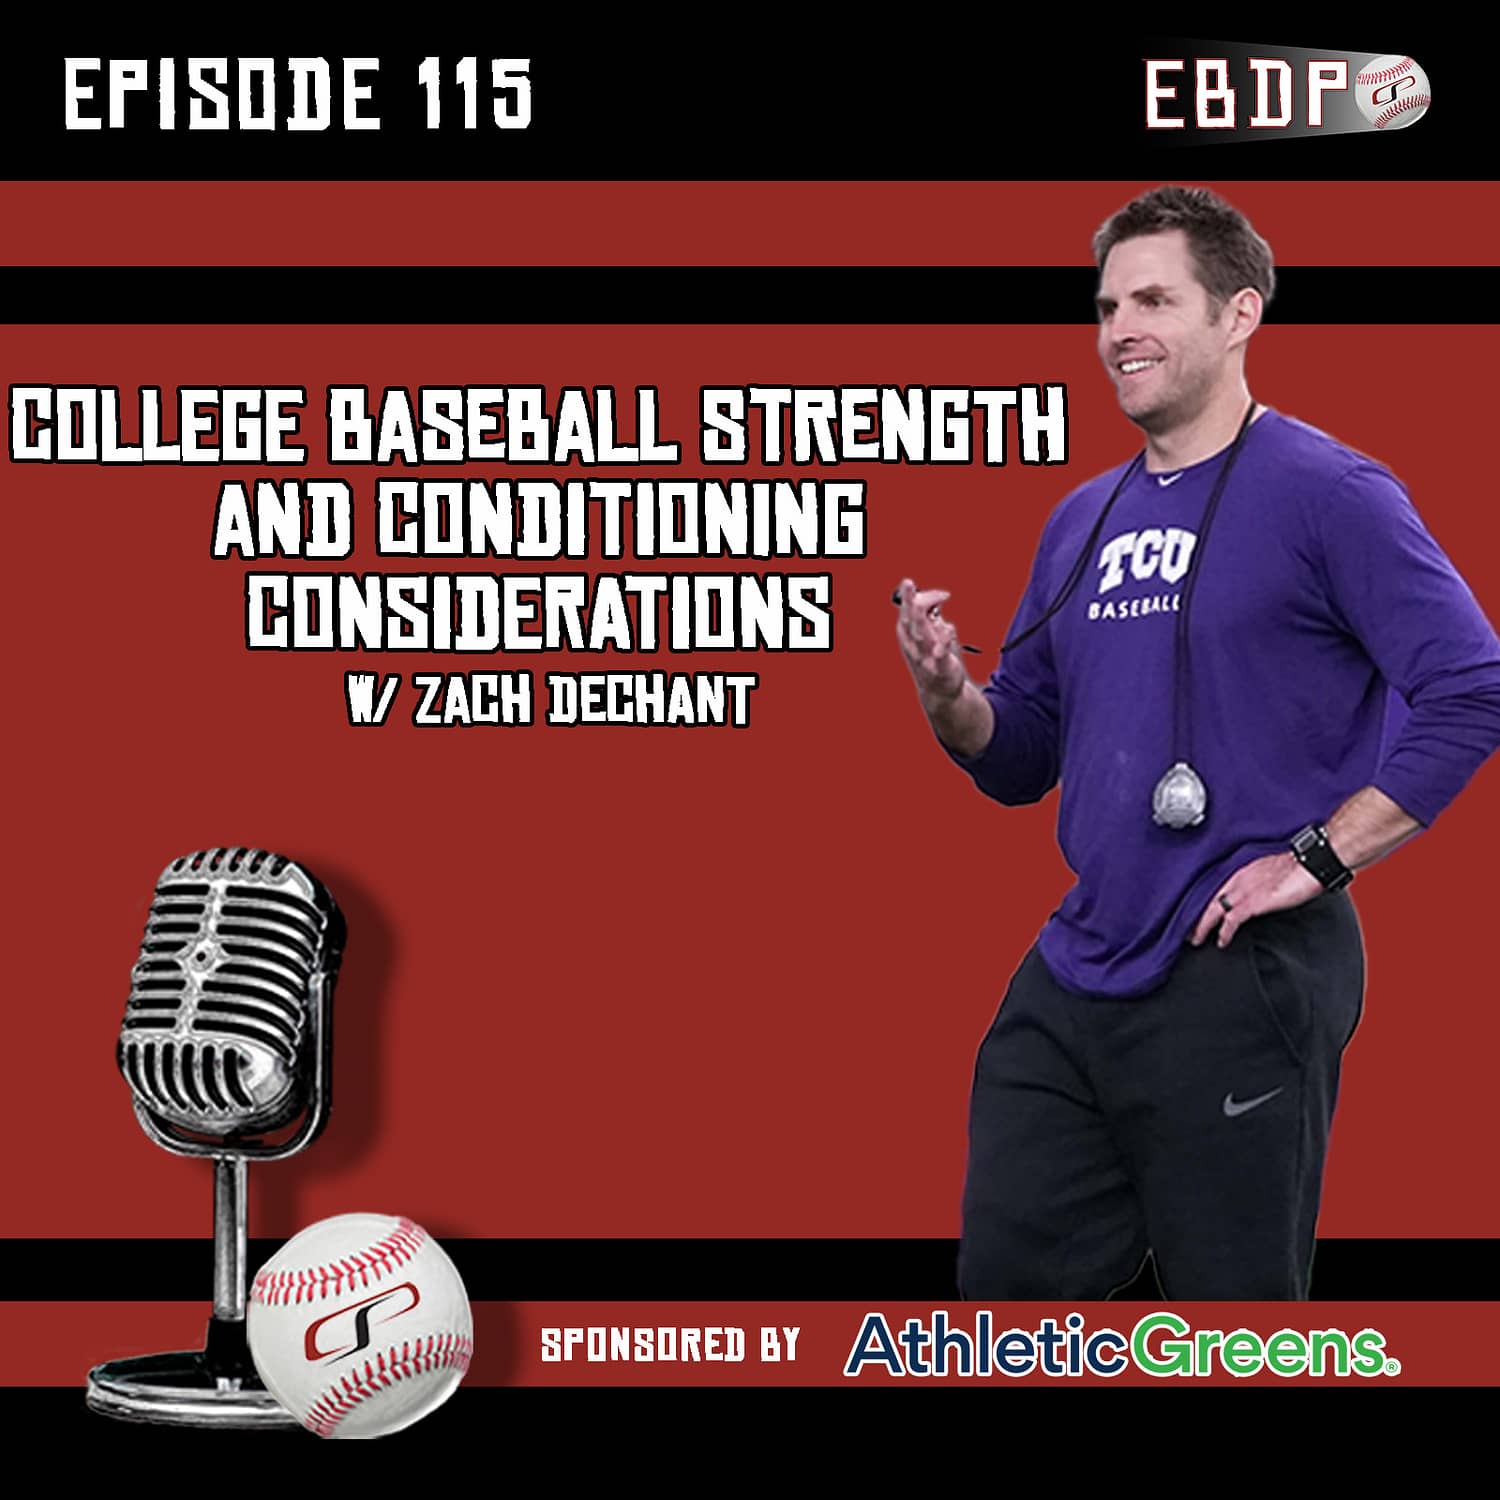 College Baseball Strength and Conditioning Considerations with Zach Dechant